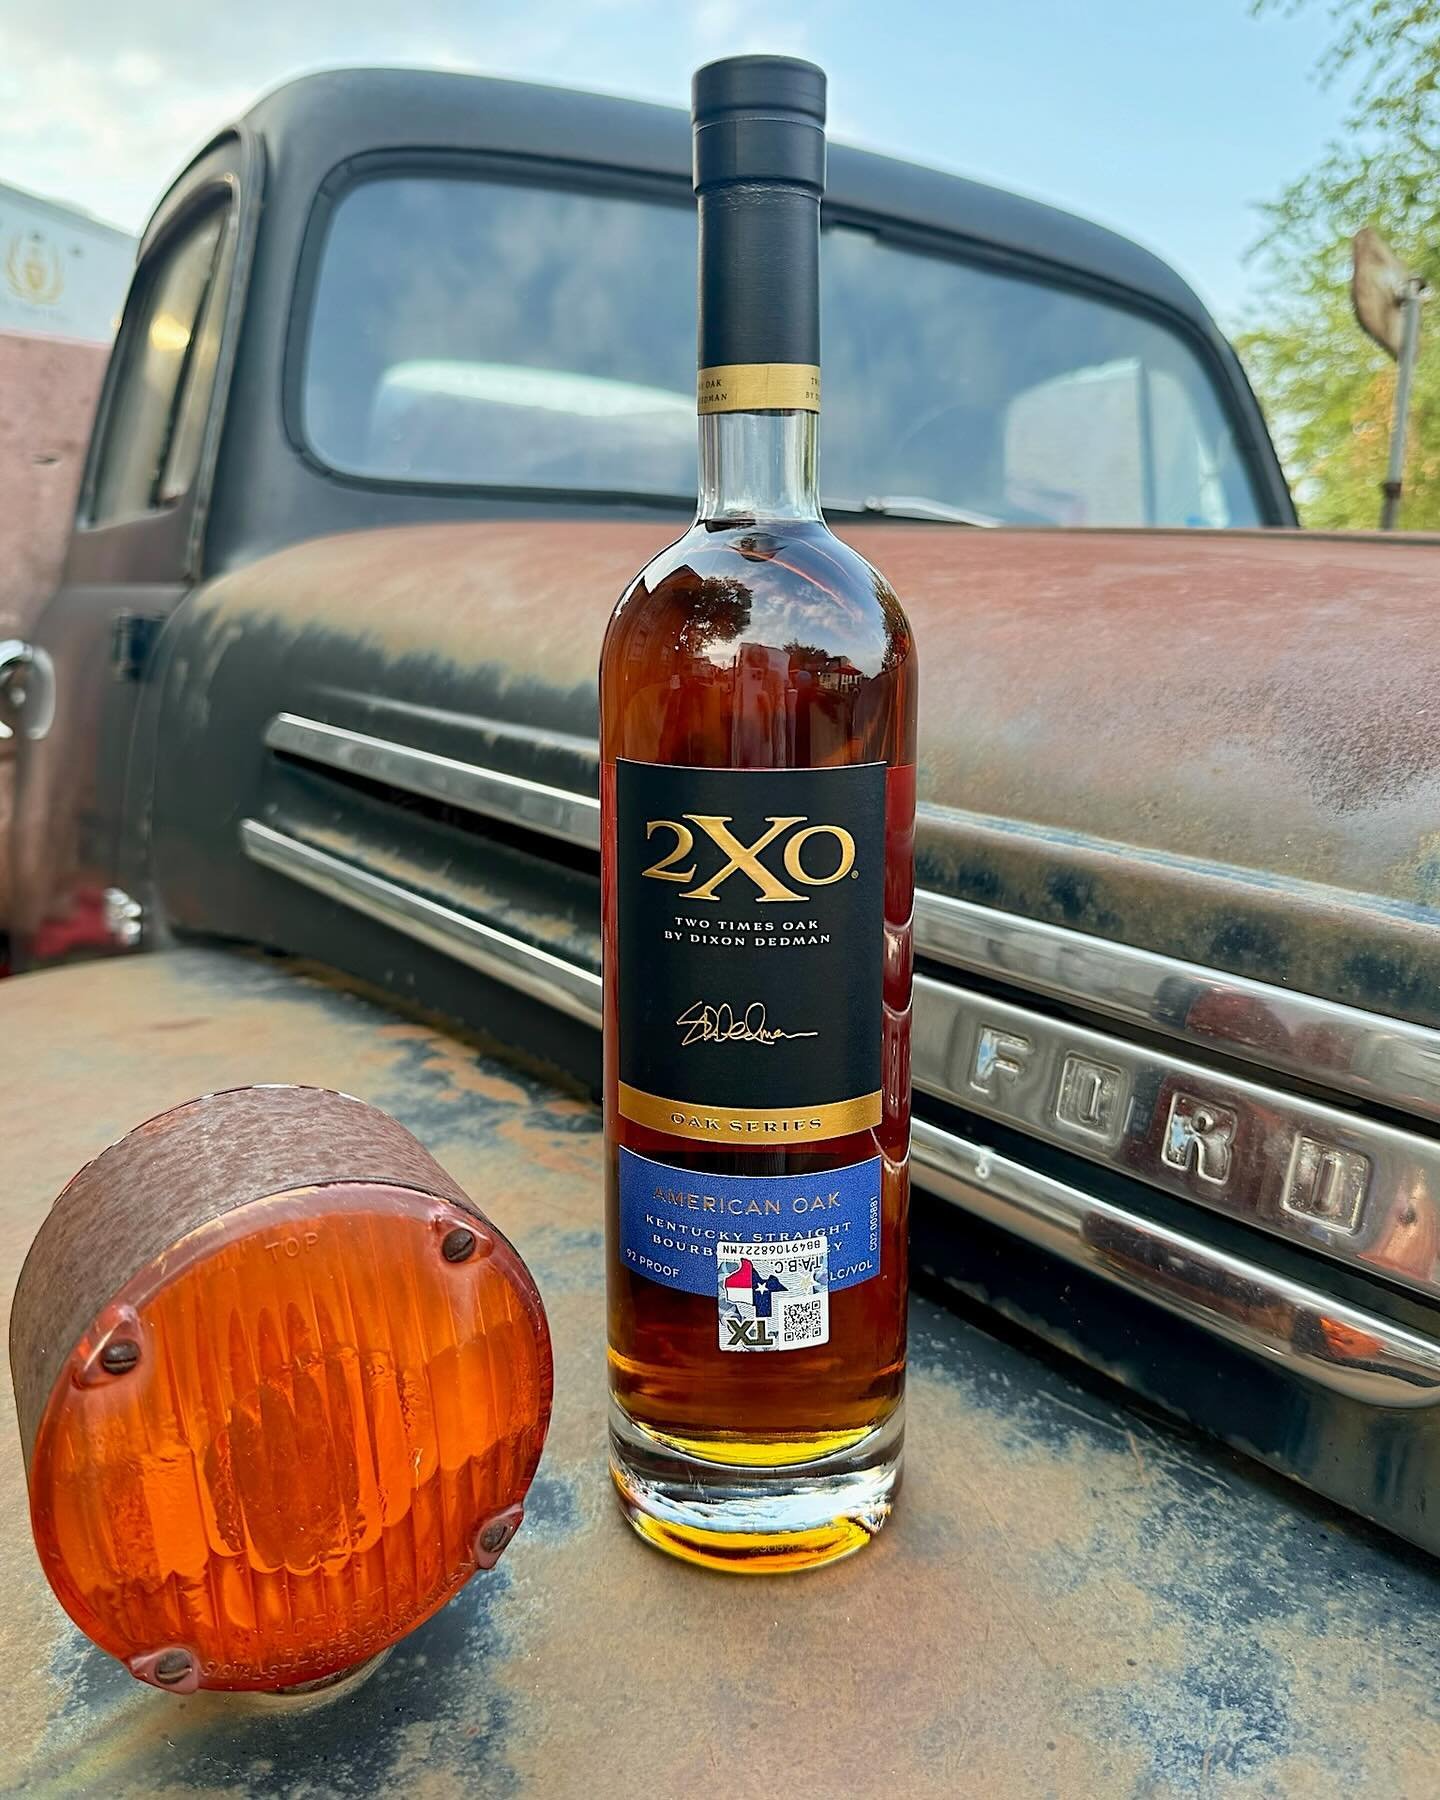 This year, we celebrated Cinco de Mayo our way &ndash; with some Bourbon and BBQ!&nbsp;A little rain and flooding didn&rsquo;t keep the great people of Austin away, as we poured several expressions of 2XO Kentucky Straight Bourbon Whiskey at @heritag